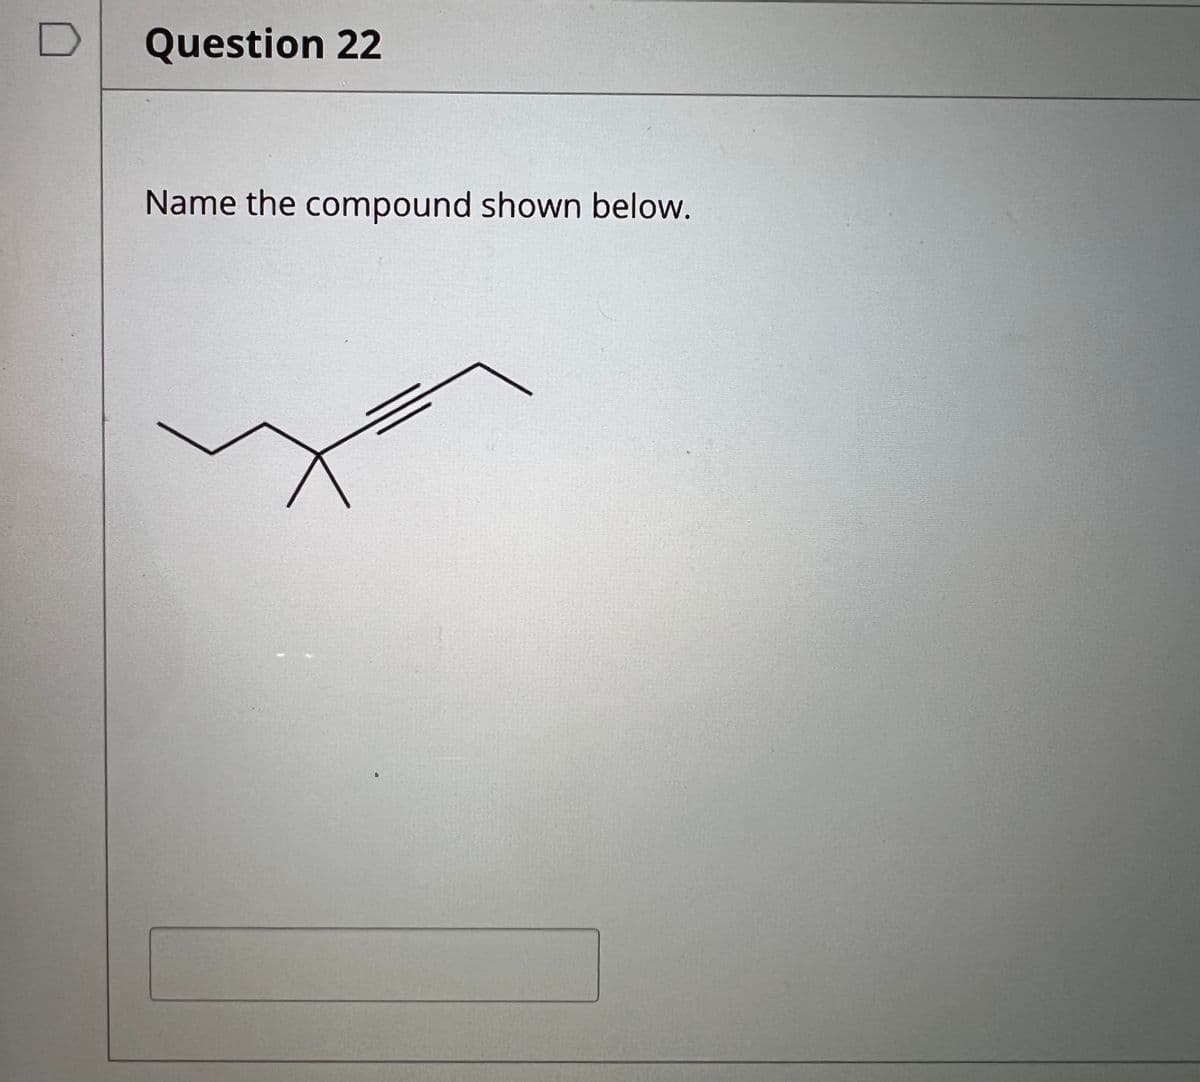 Question 22
Name the compound shown below.
